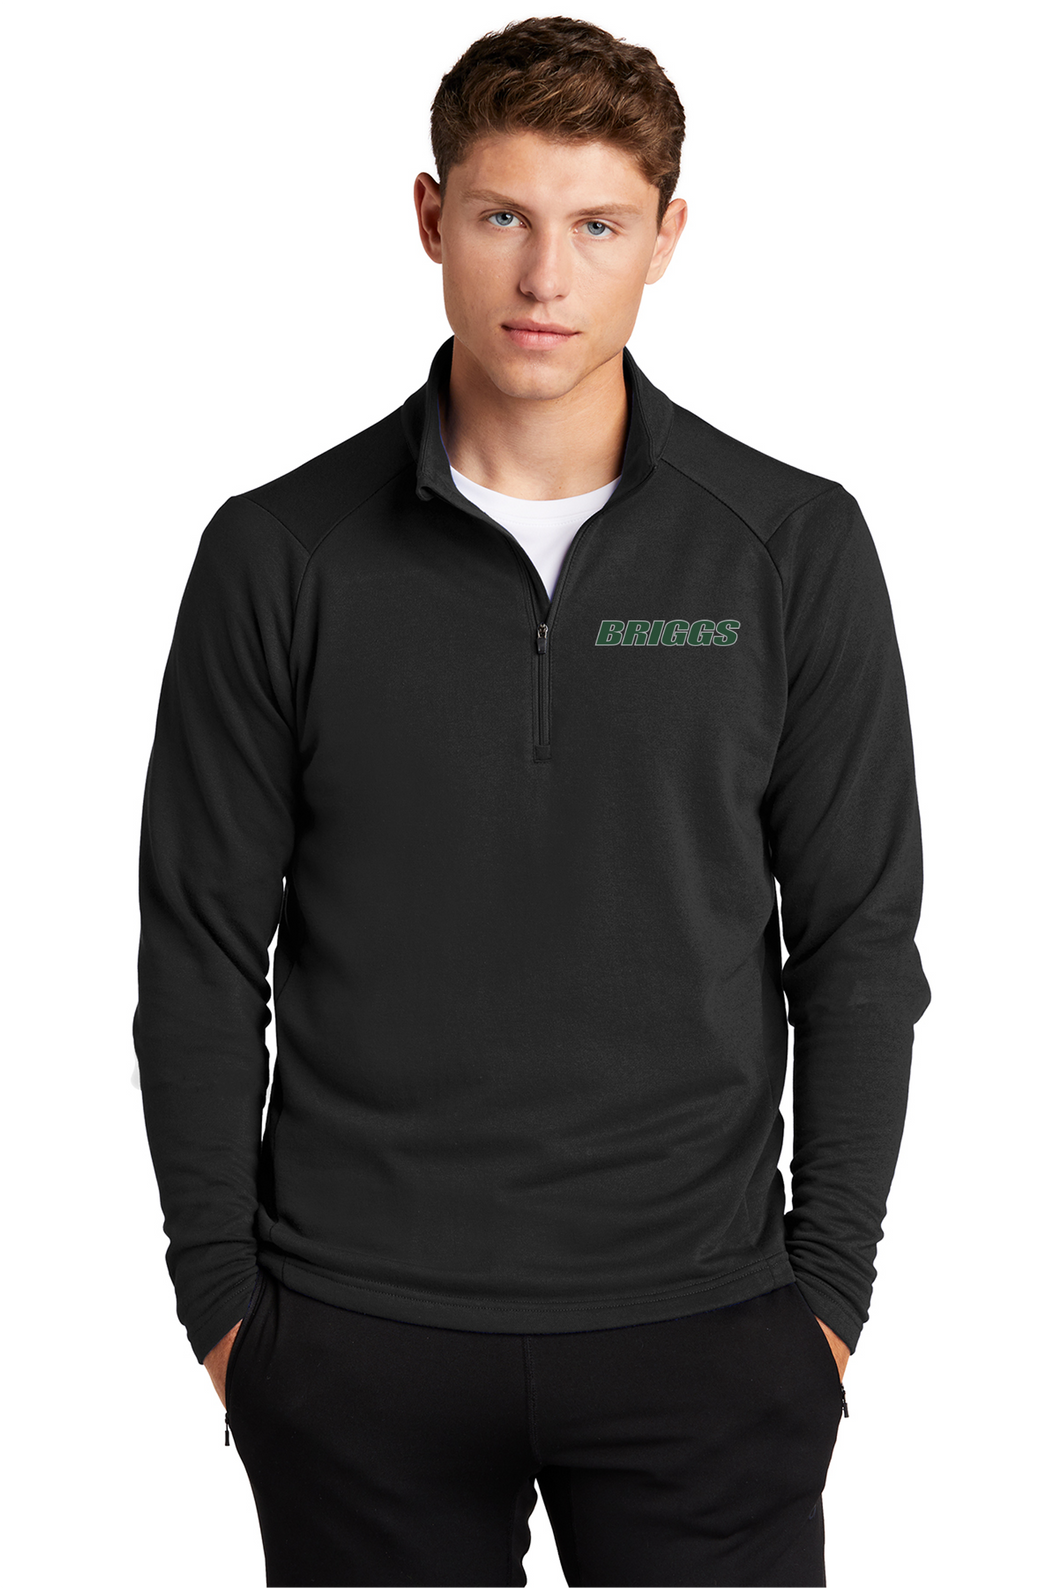 *Lightweight French Terry 1/4-Zip Pullover - Briggs Elementary